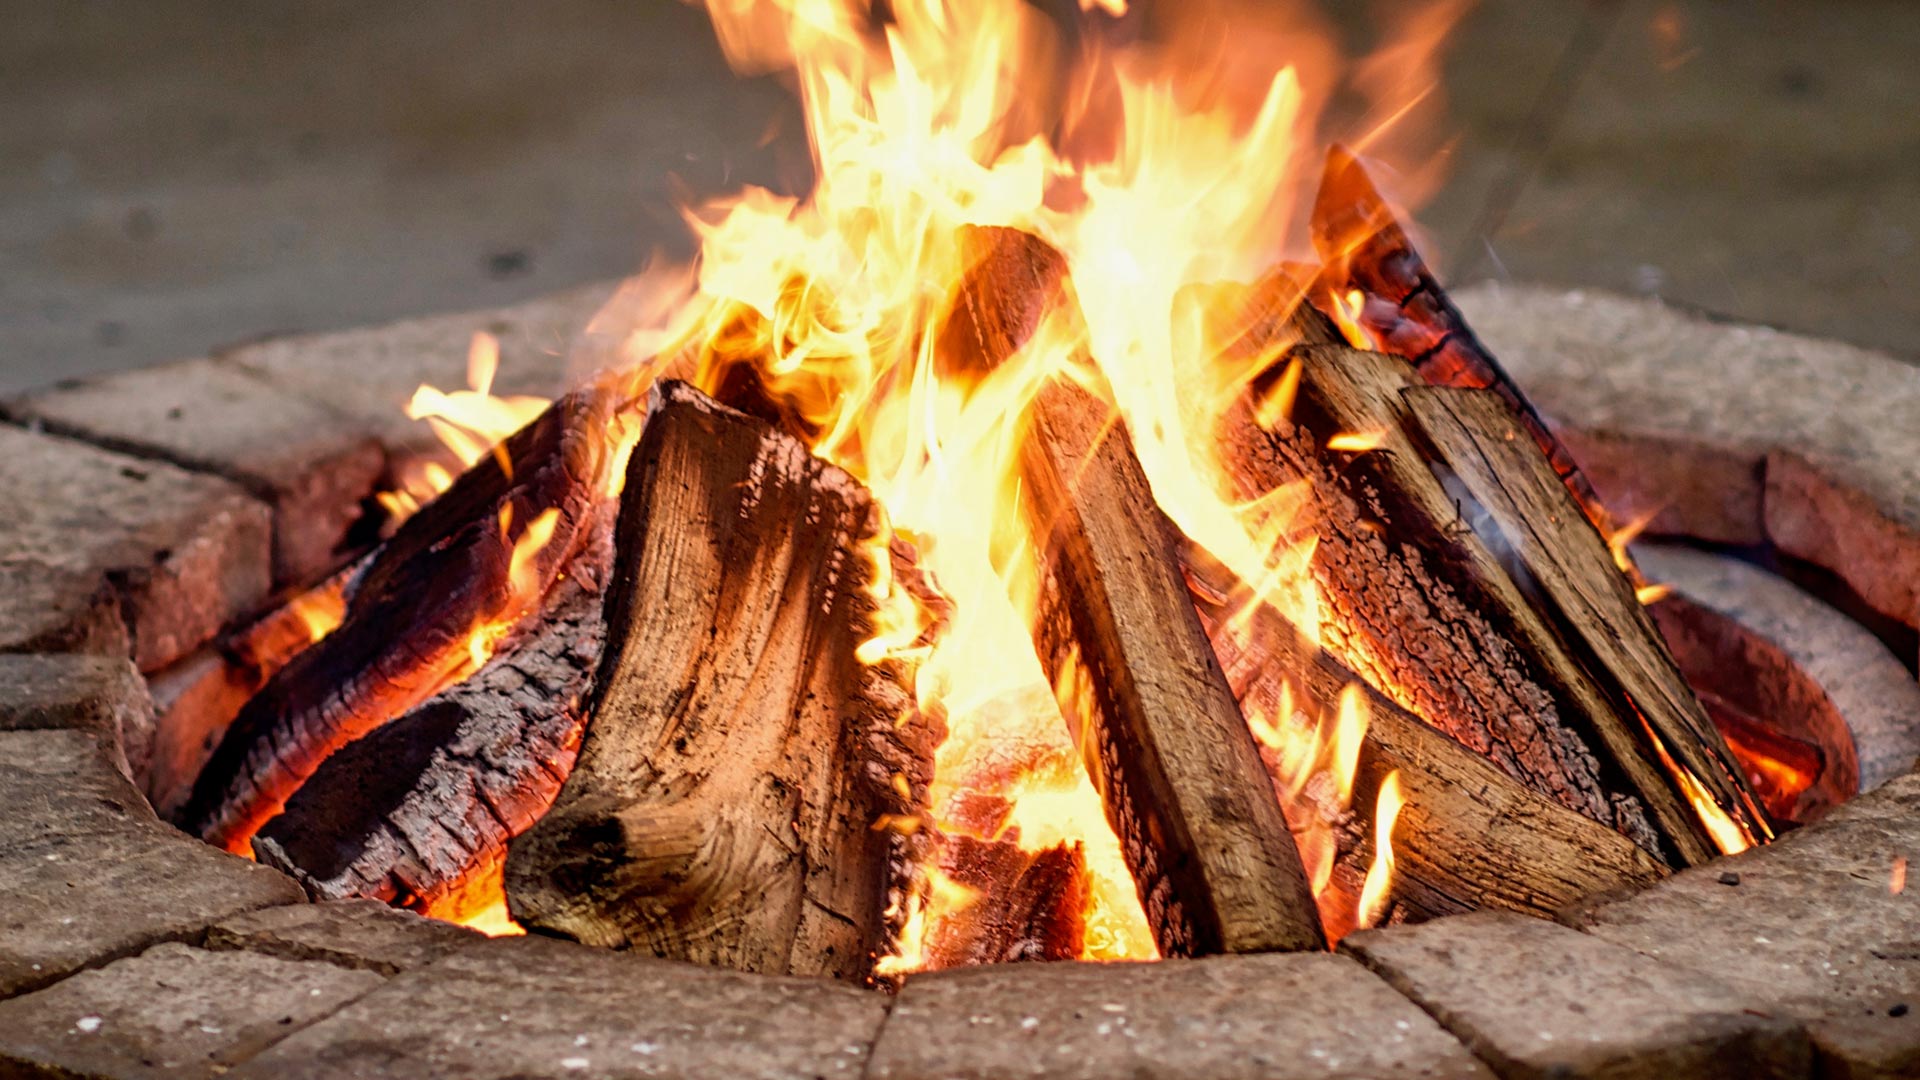 Gas-, Wood- & Propane-burning Fire Pits - Which Option Should You Choose?